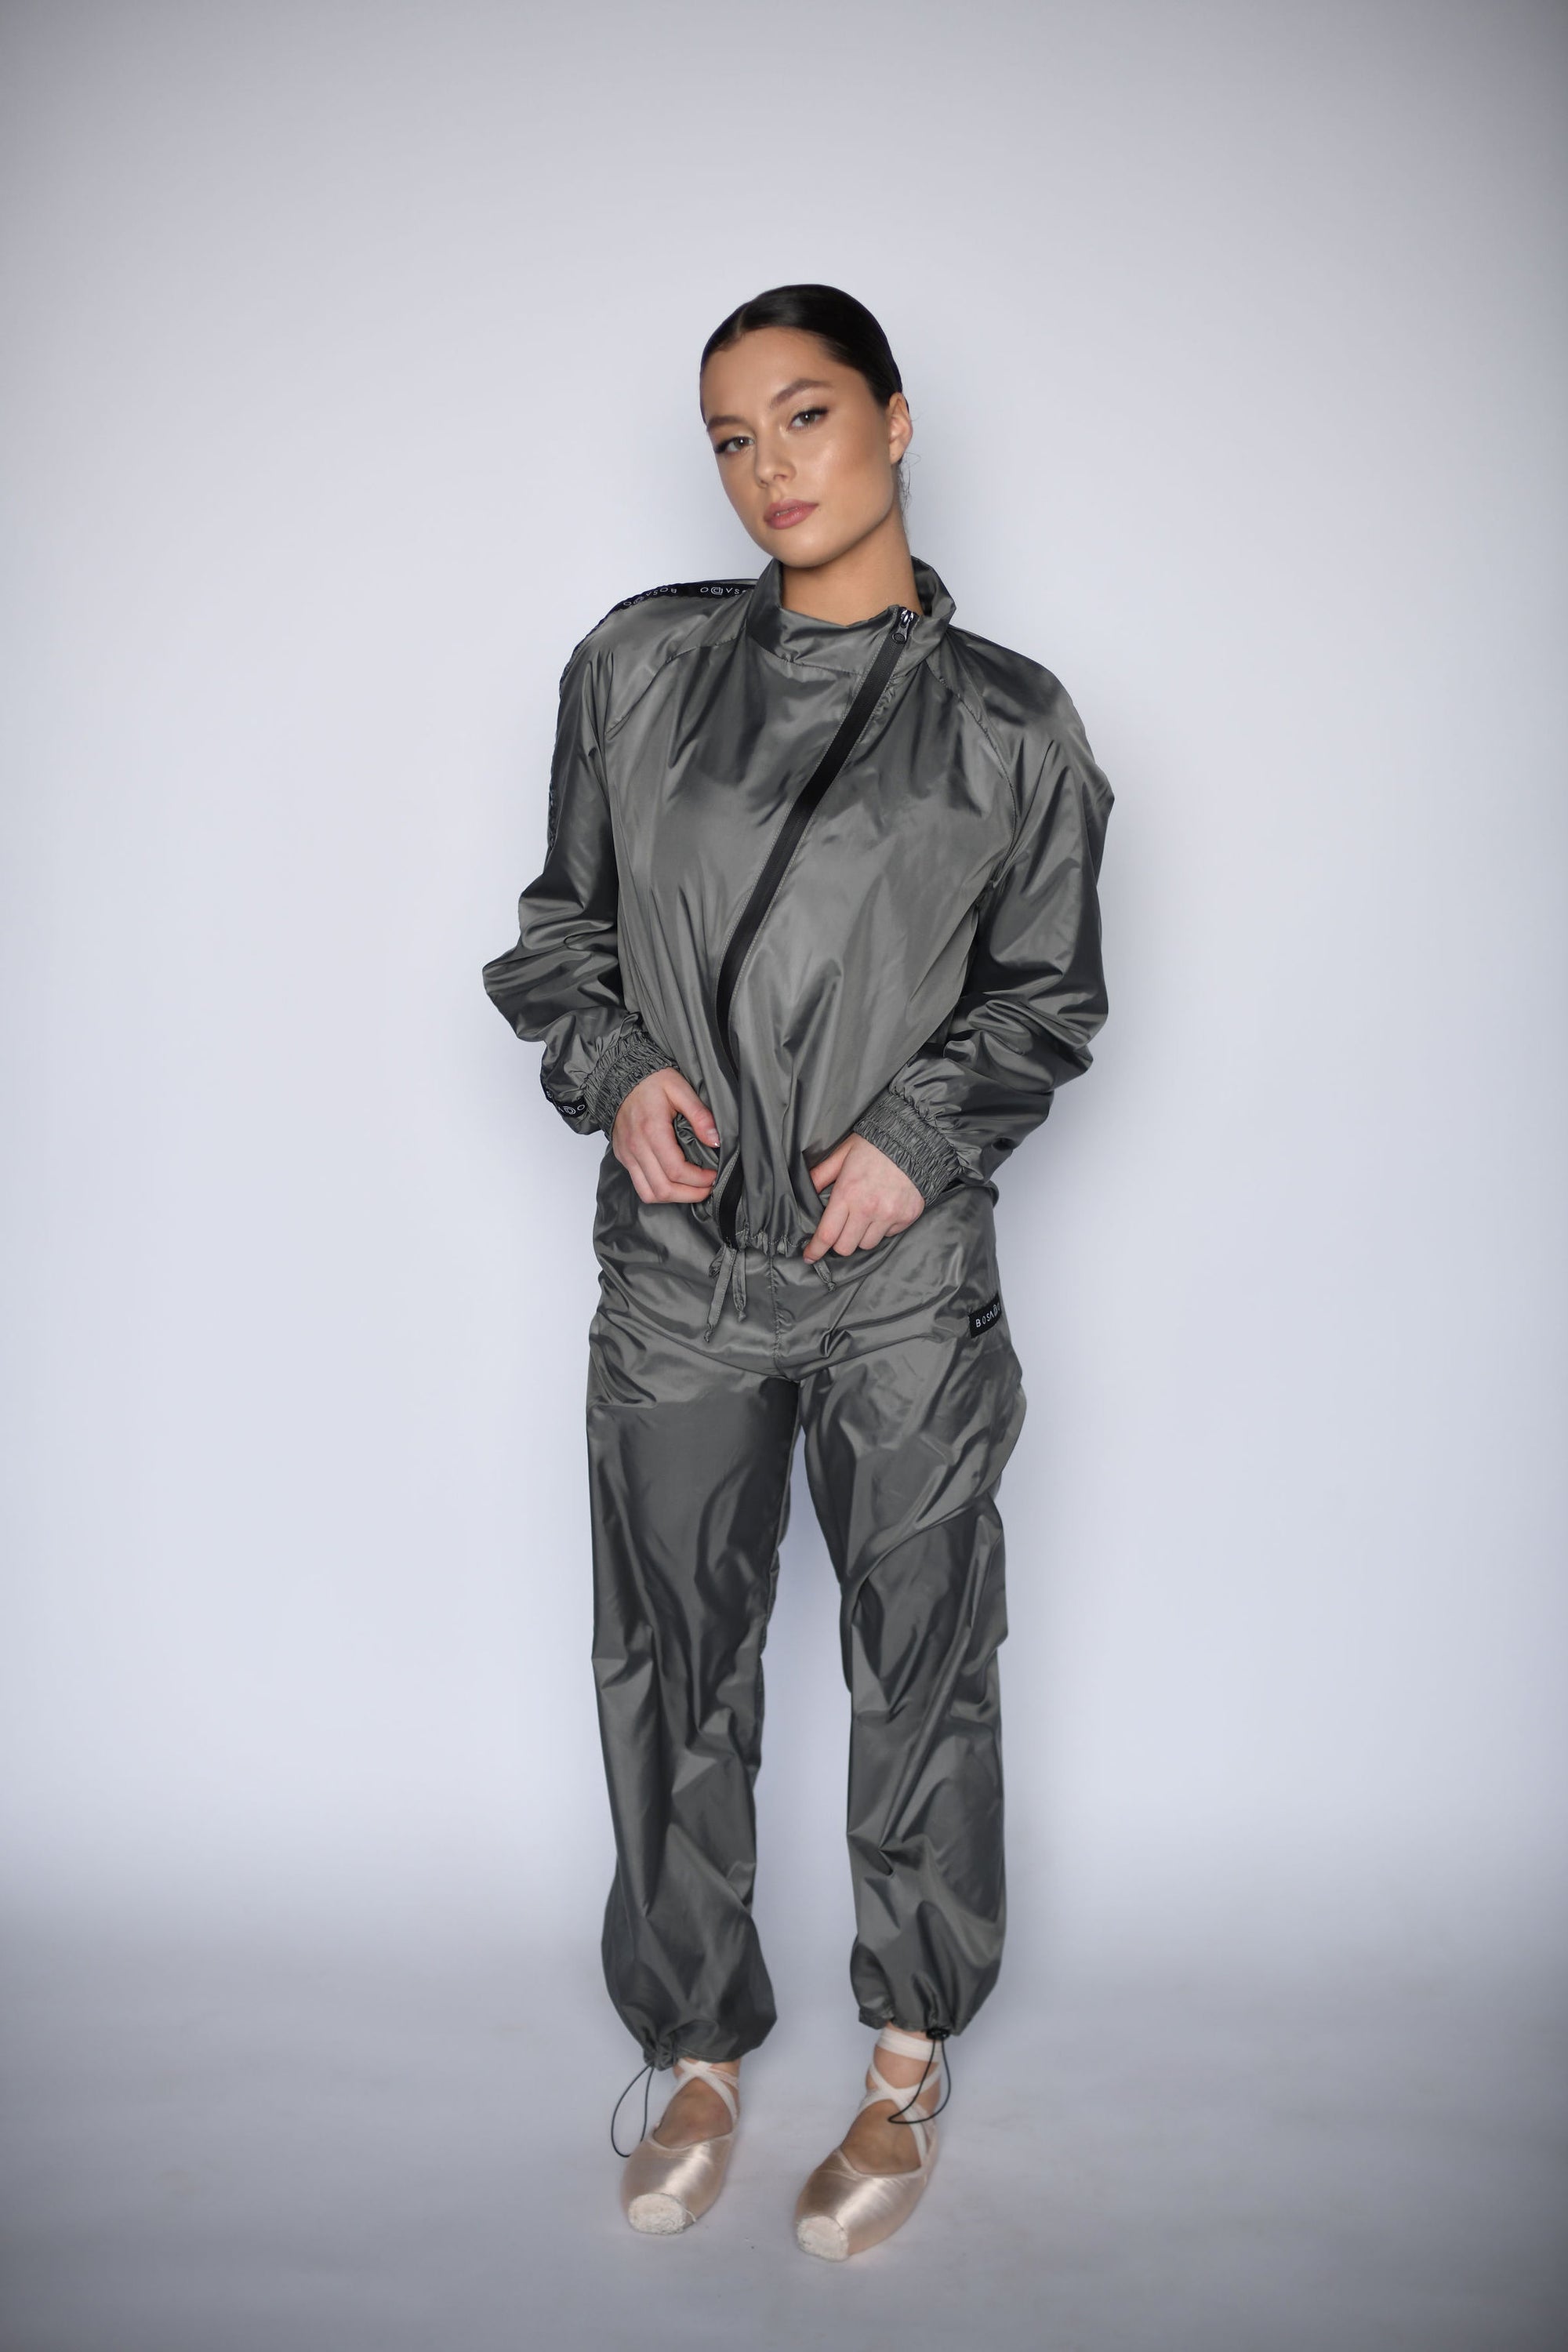 NEW URBAN SWAN COLLECTION S/S 23 | Dark concrete sports suit with pants + shorts